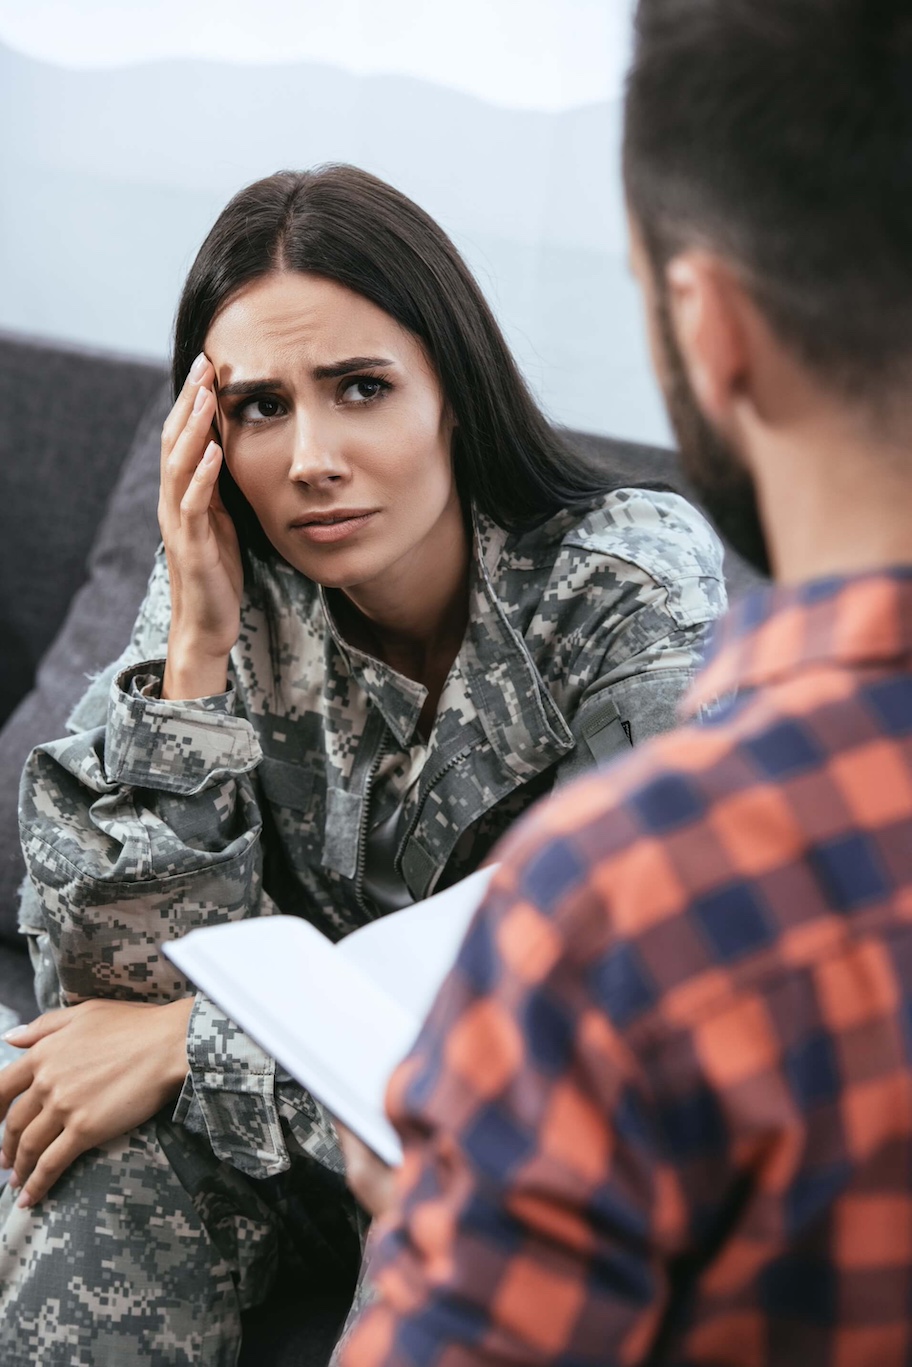 female veteran distressed with partner not able to overcome issues with intimacy